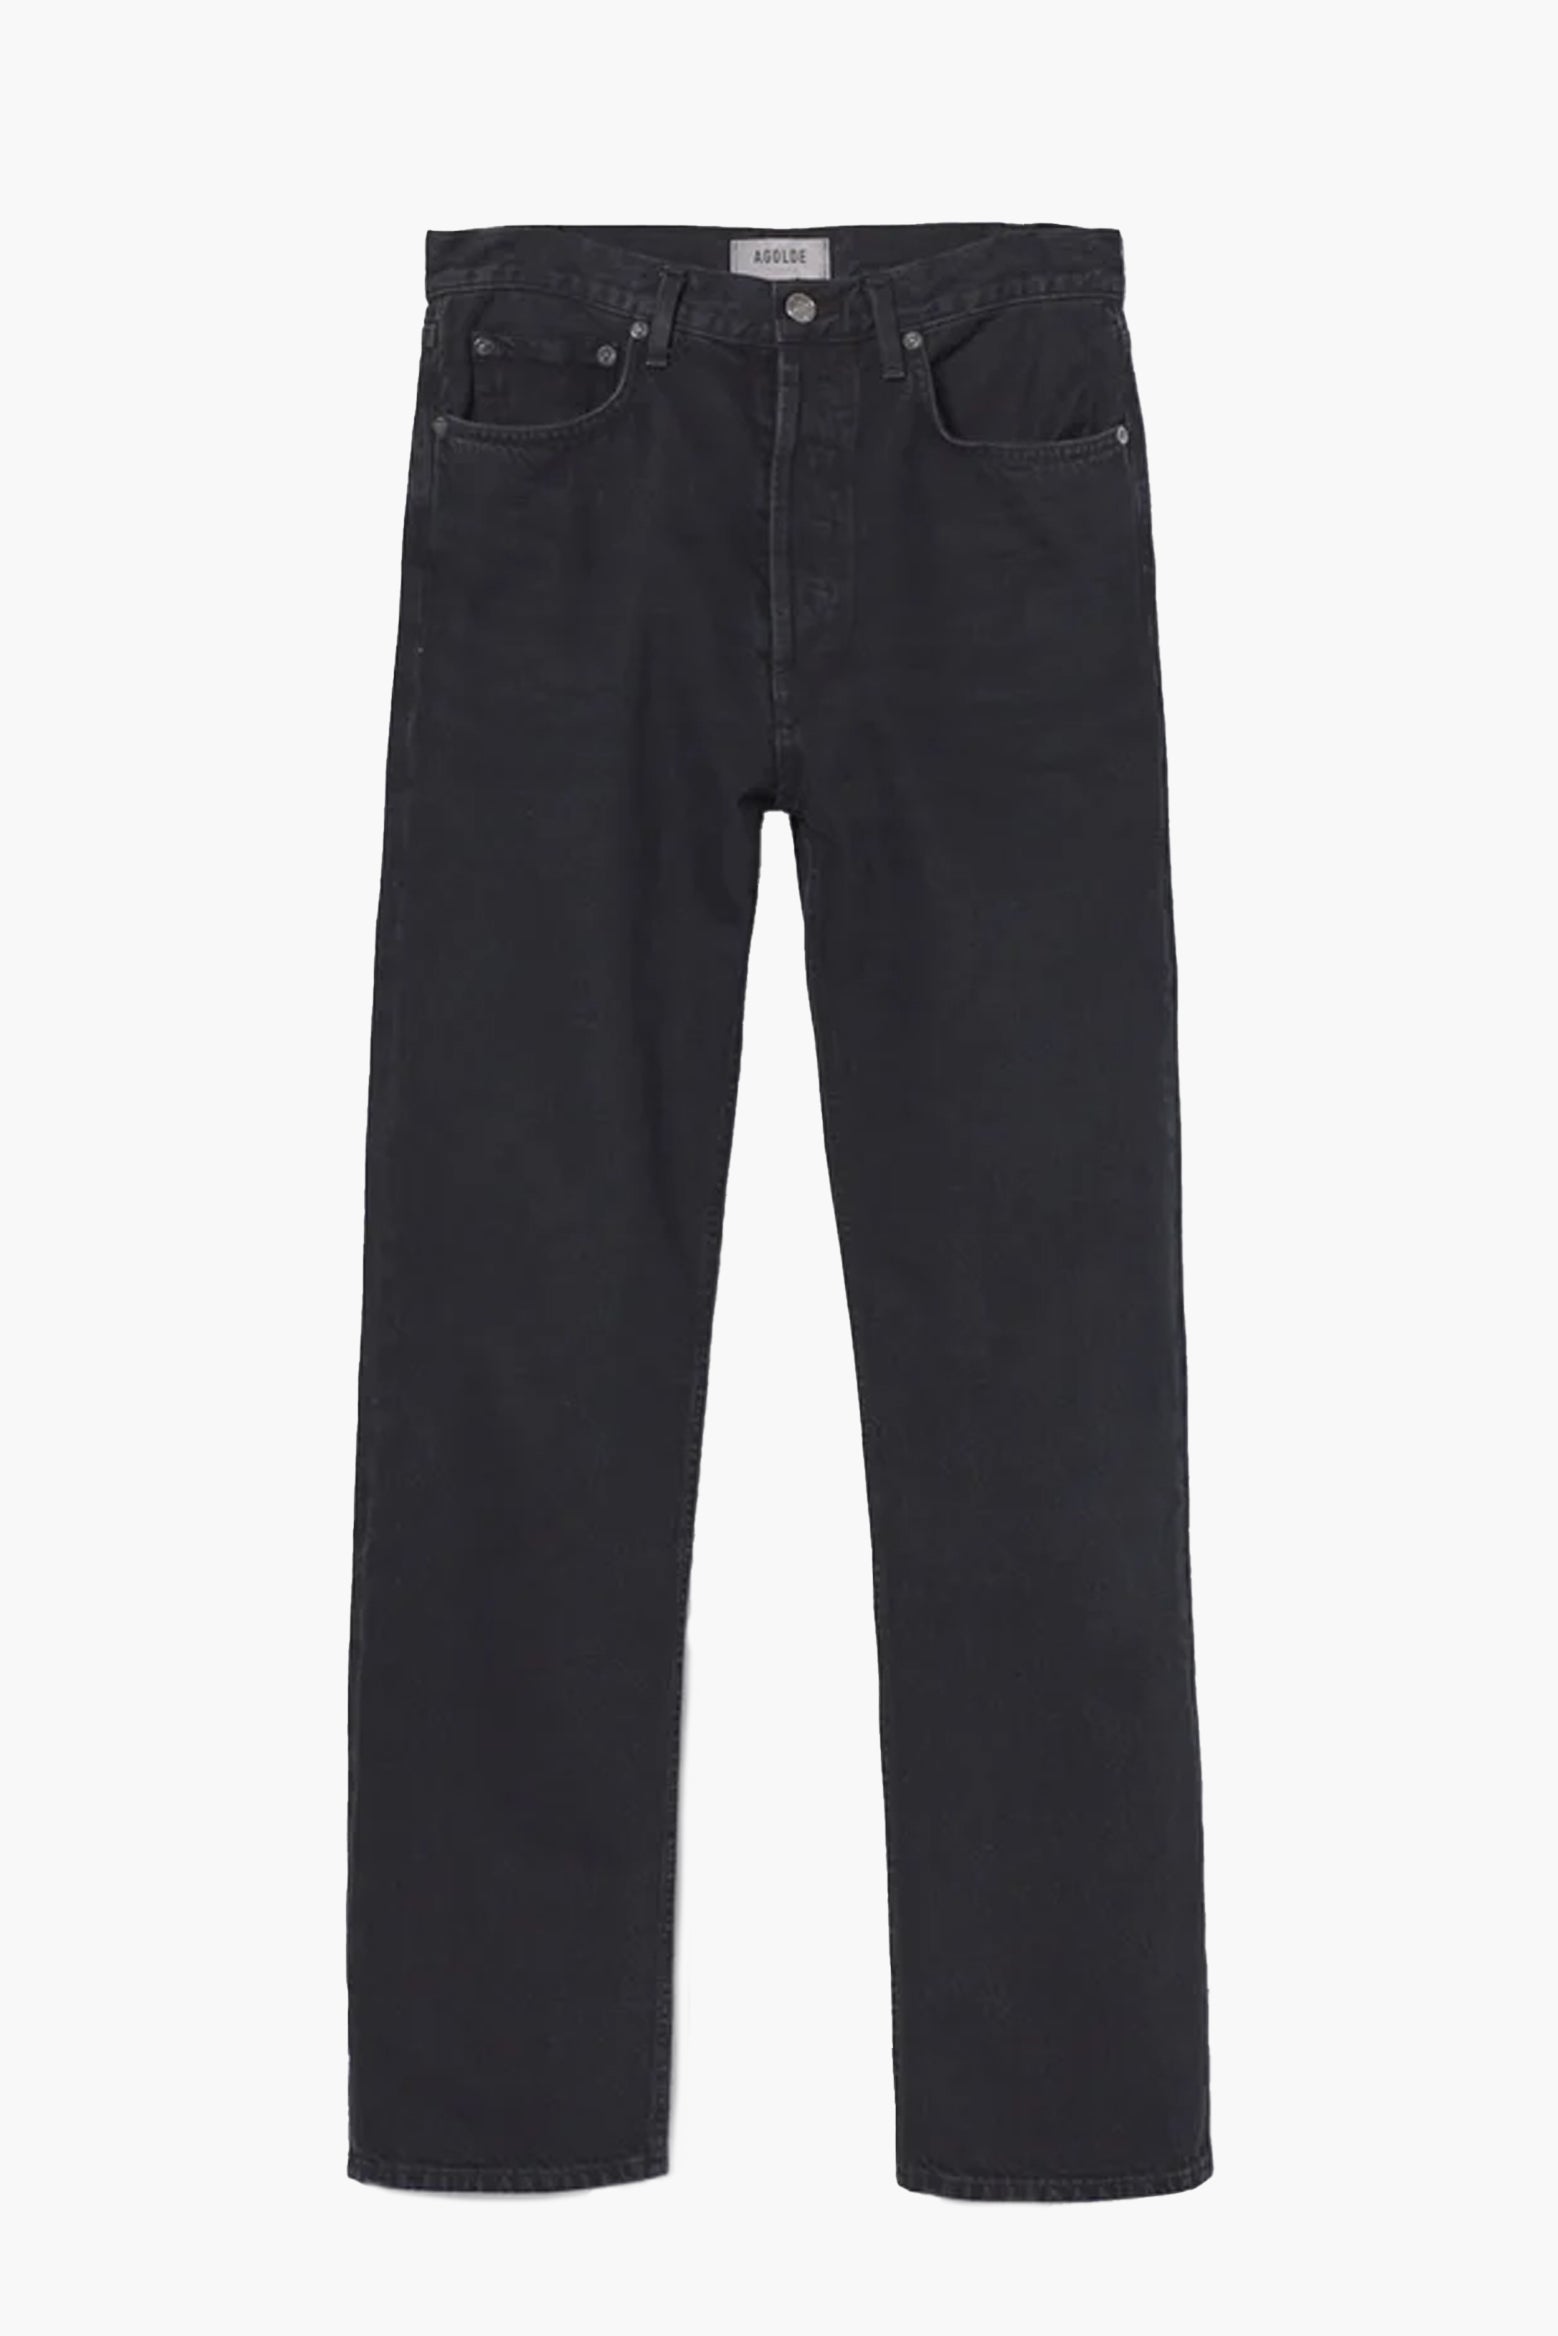 Agolde 90's Pinch Waist High Rise Straight Jean in Crushed available at The New Trend Australia. 